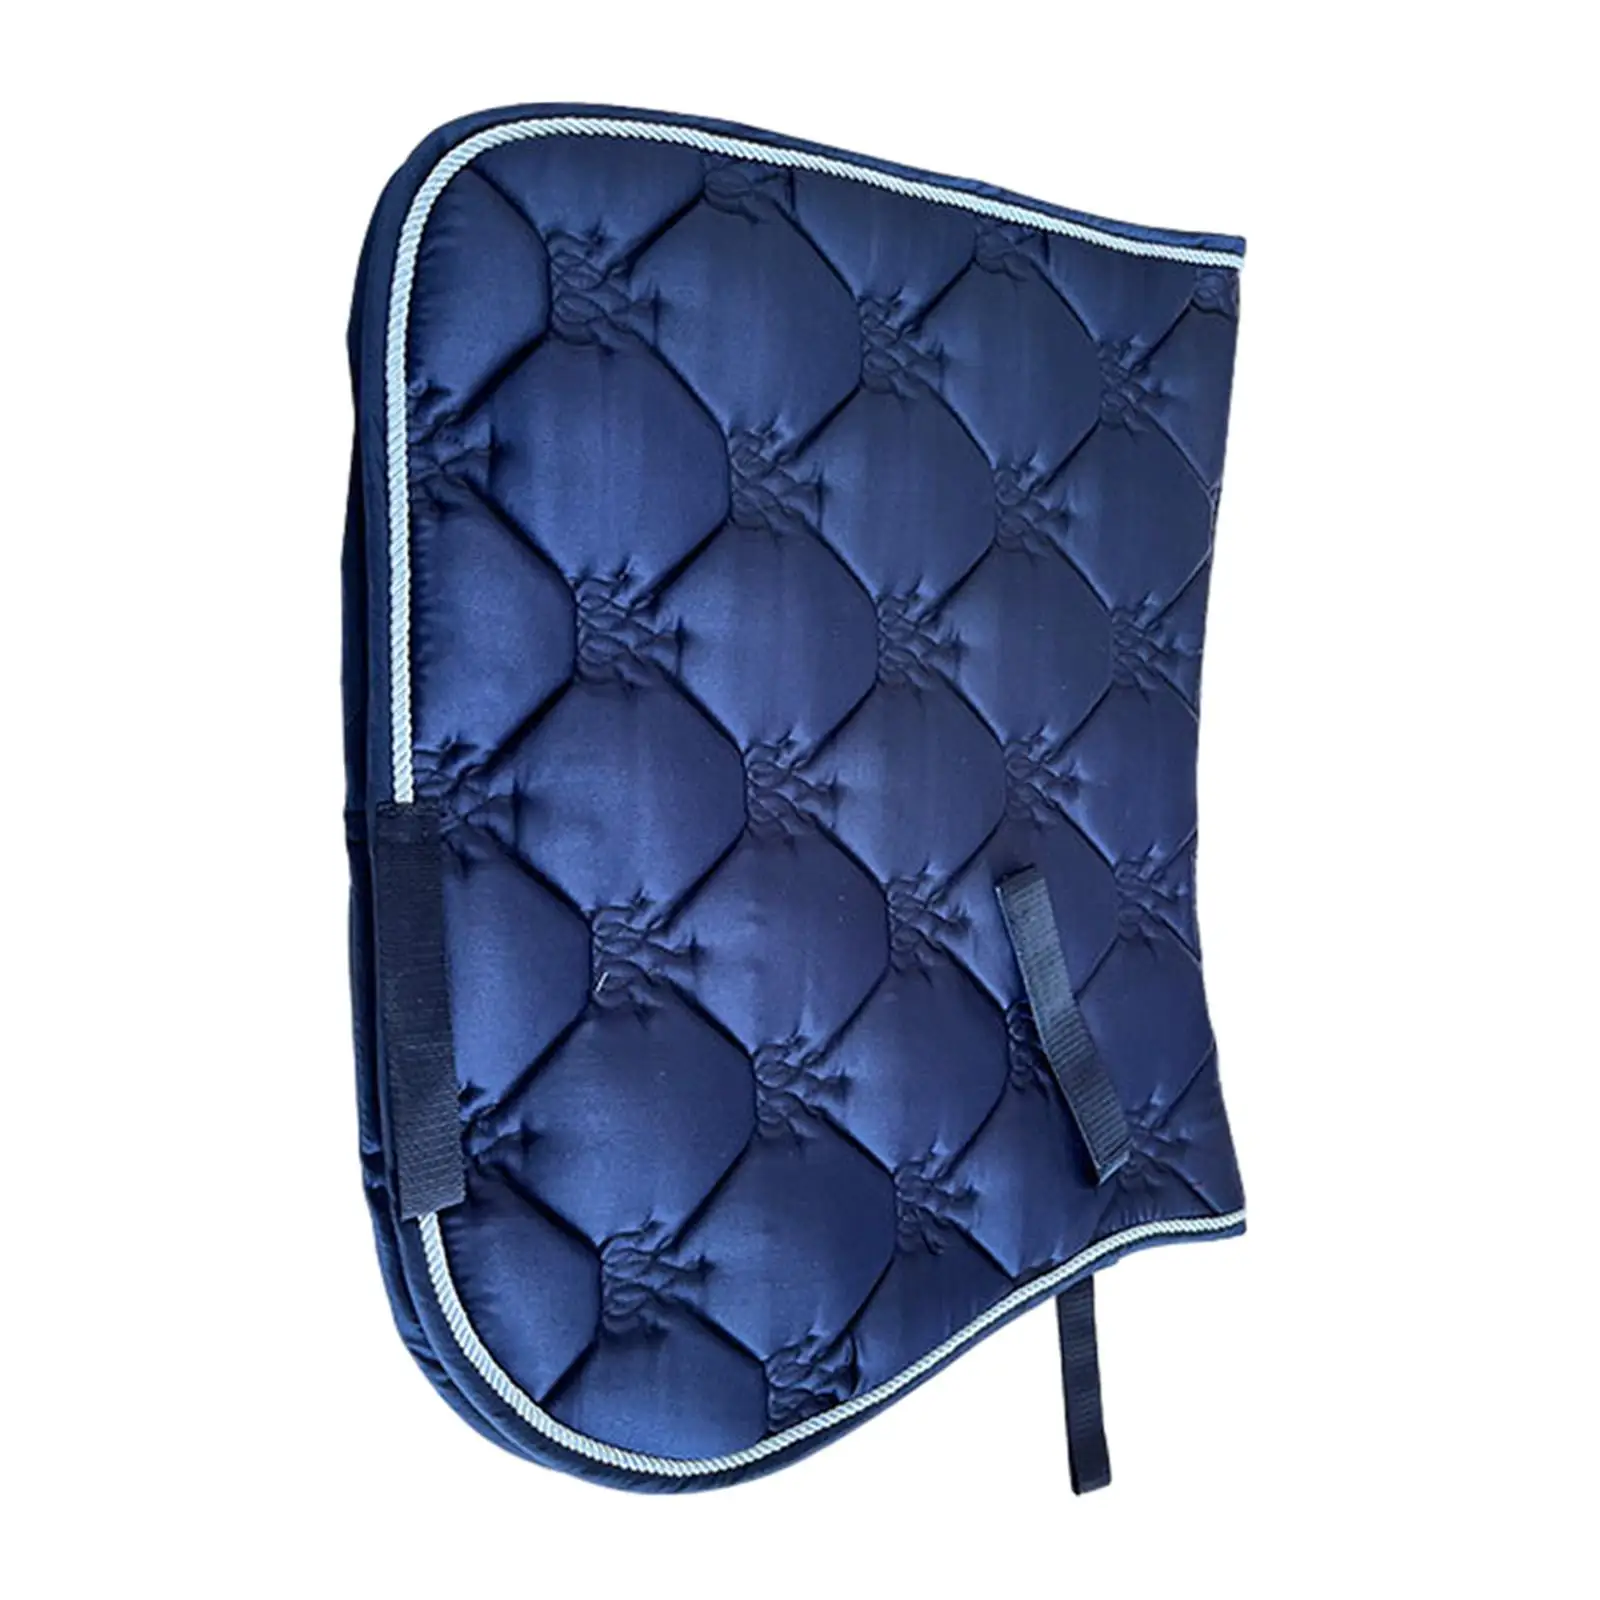 Saddle Pad for Horse Portable Riding Seat Cushion Equestrian Riding Equipment Protective Lightweight Accessories Soft Western